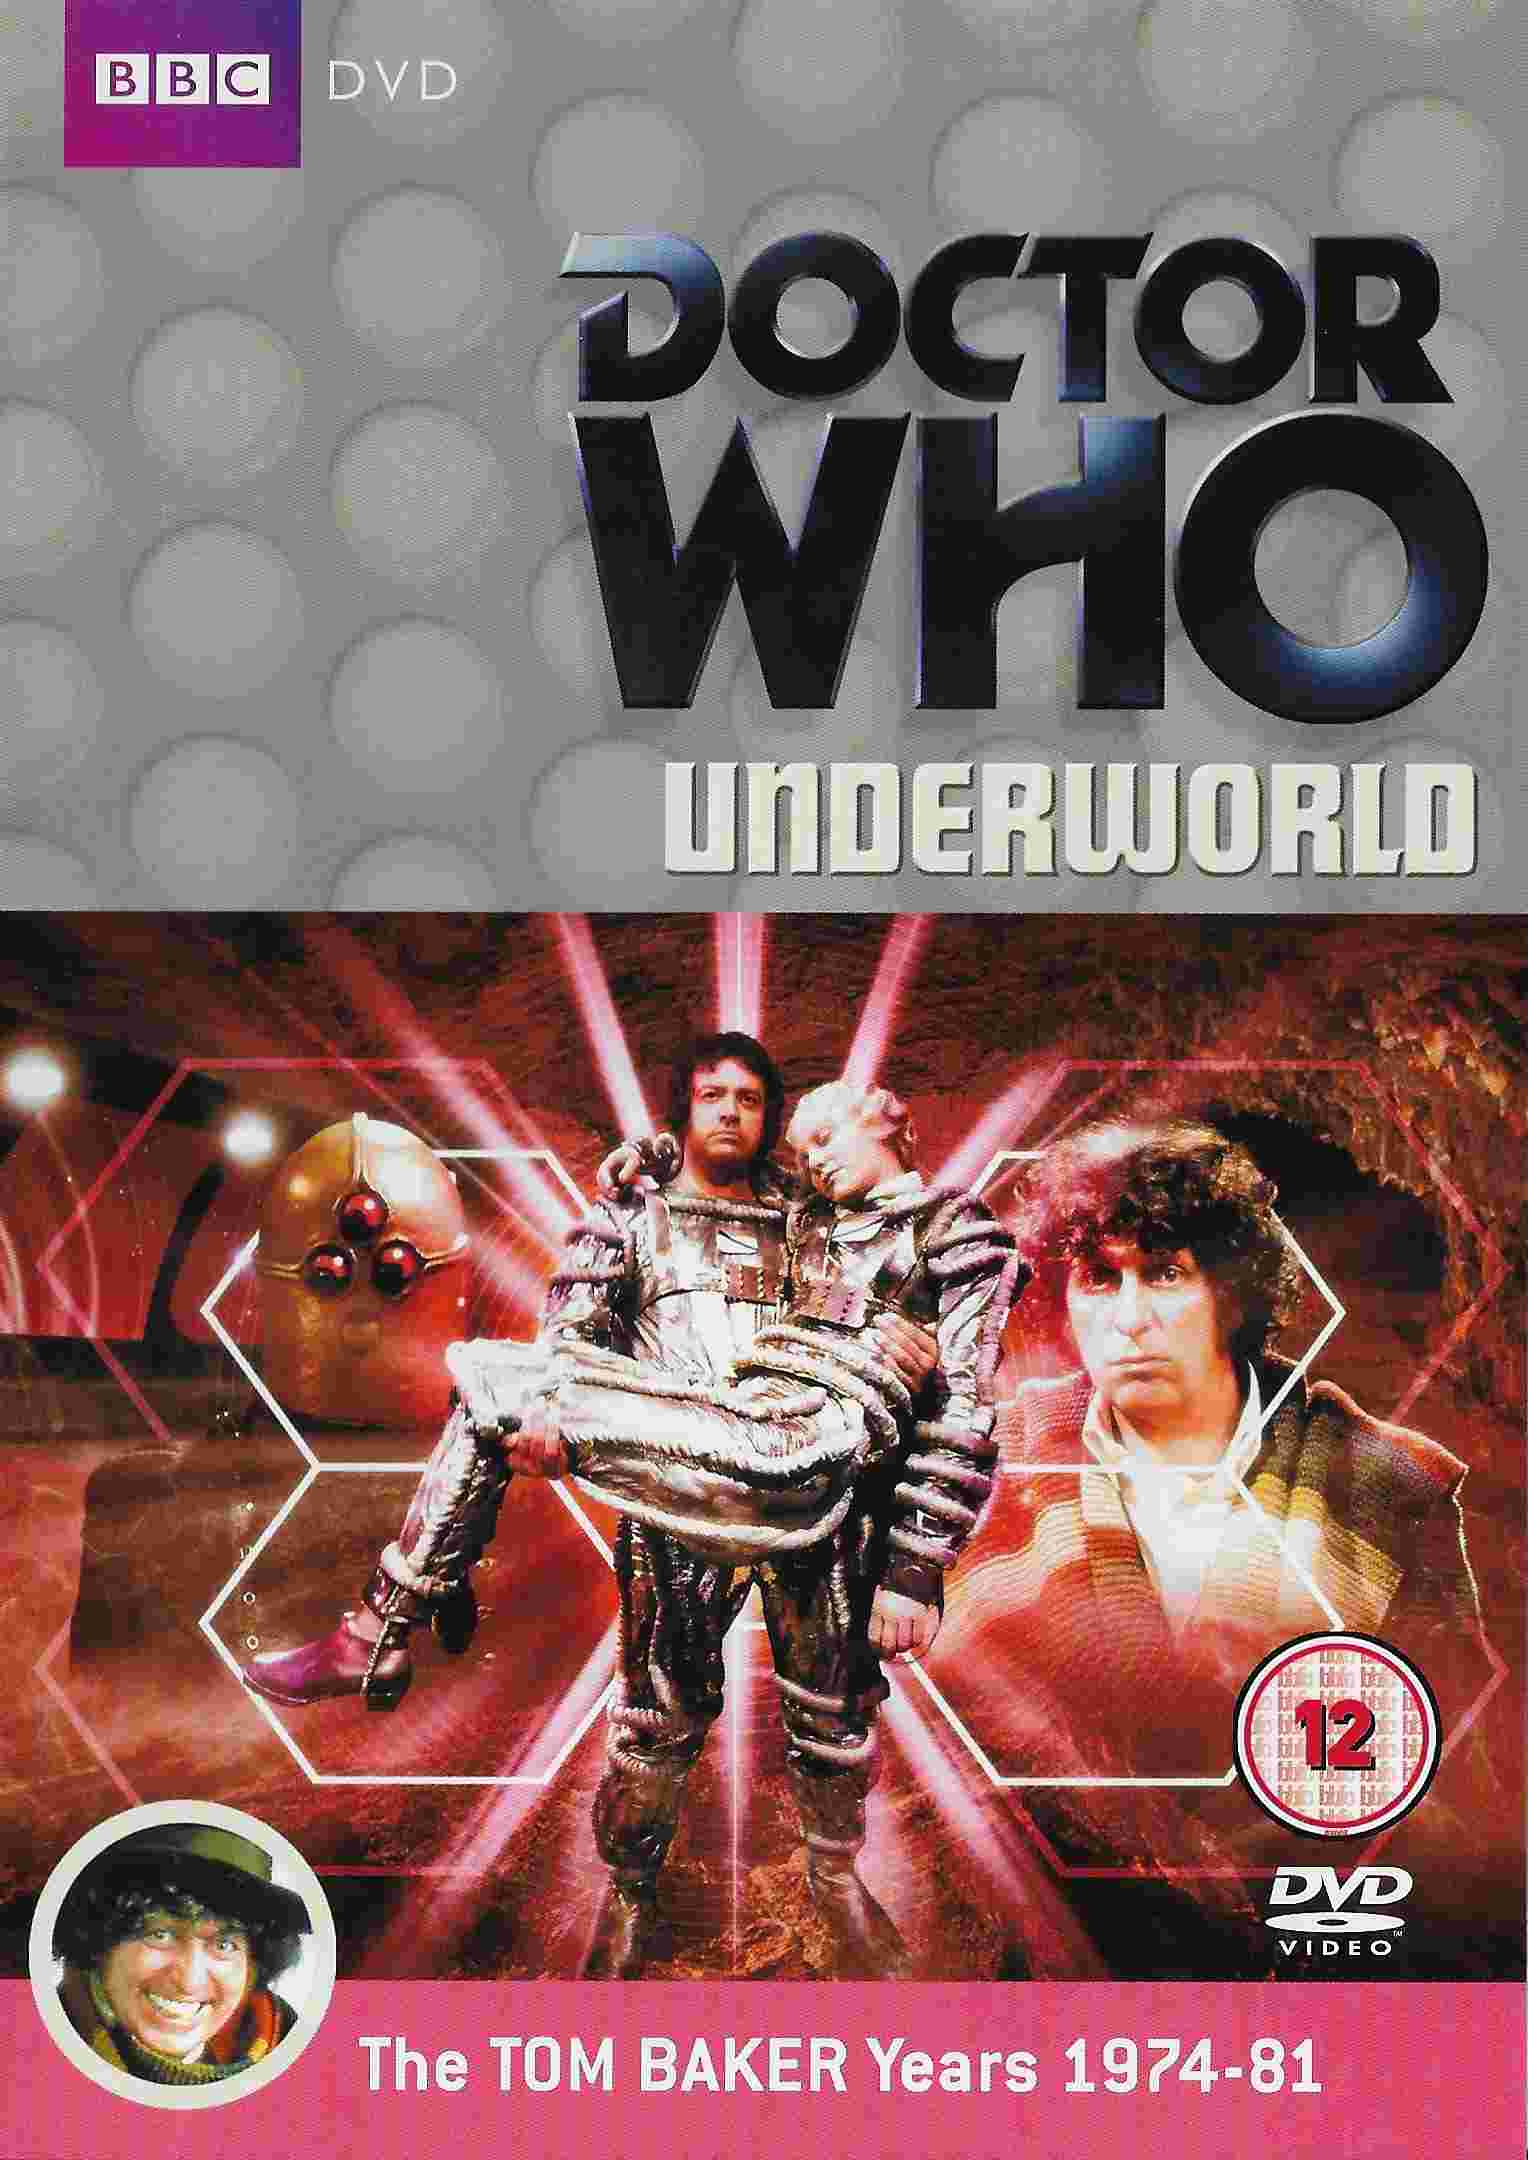 Picture of BBCDVD 2851B Doctor Who - Underworld by artist Bob Baker / Dave Martin from the BBC records and Tapes library